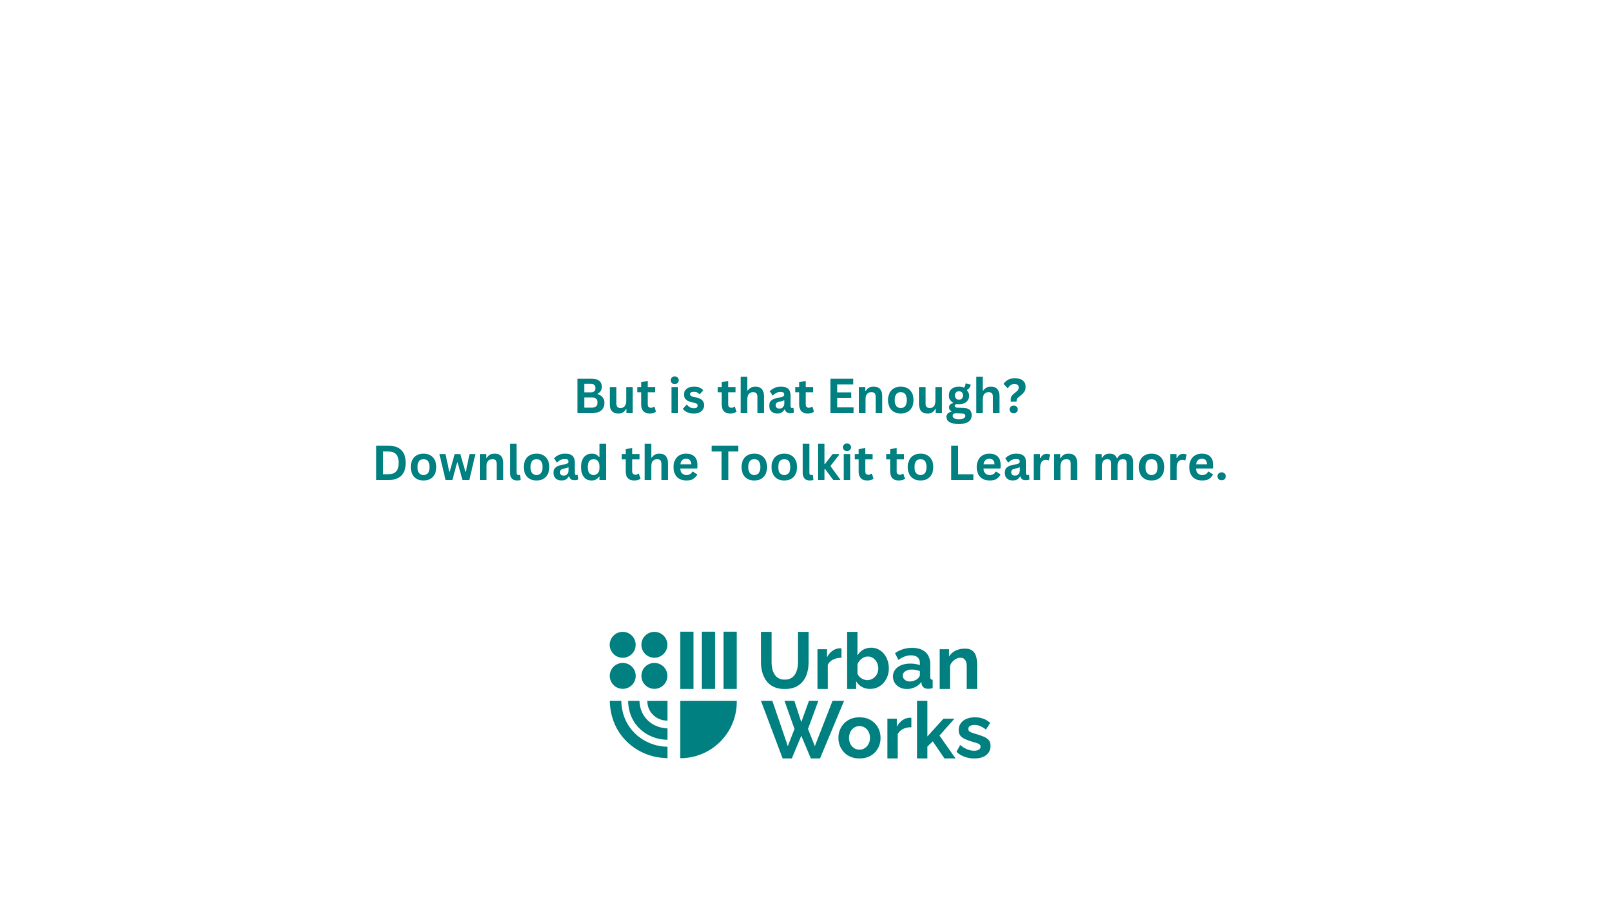 But is Congestion pricing enough to reduce traffic? Download the toolkit made by urbanworks to learn more.